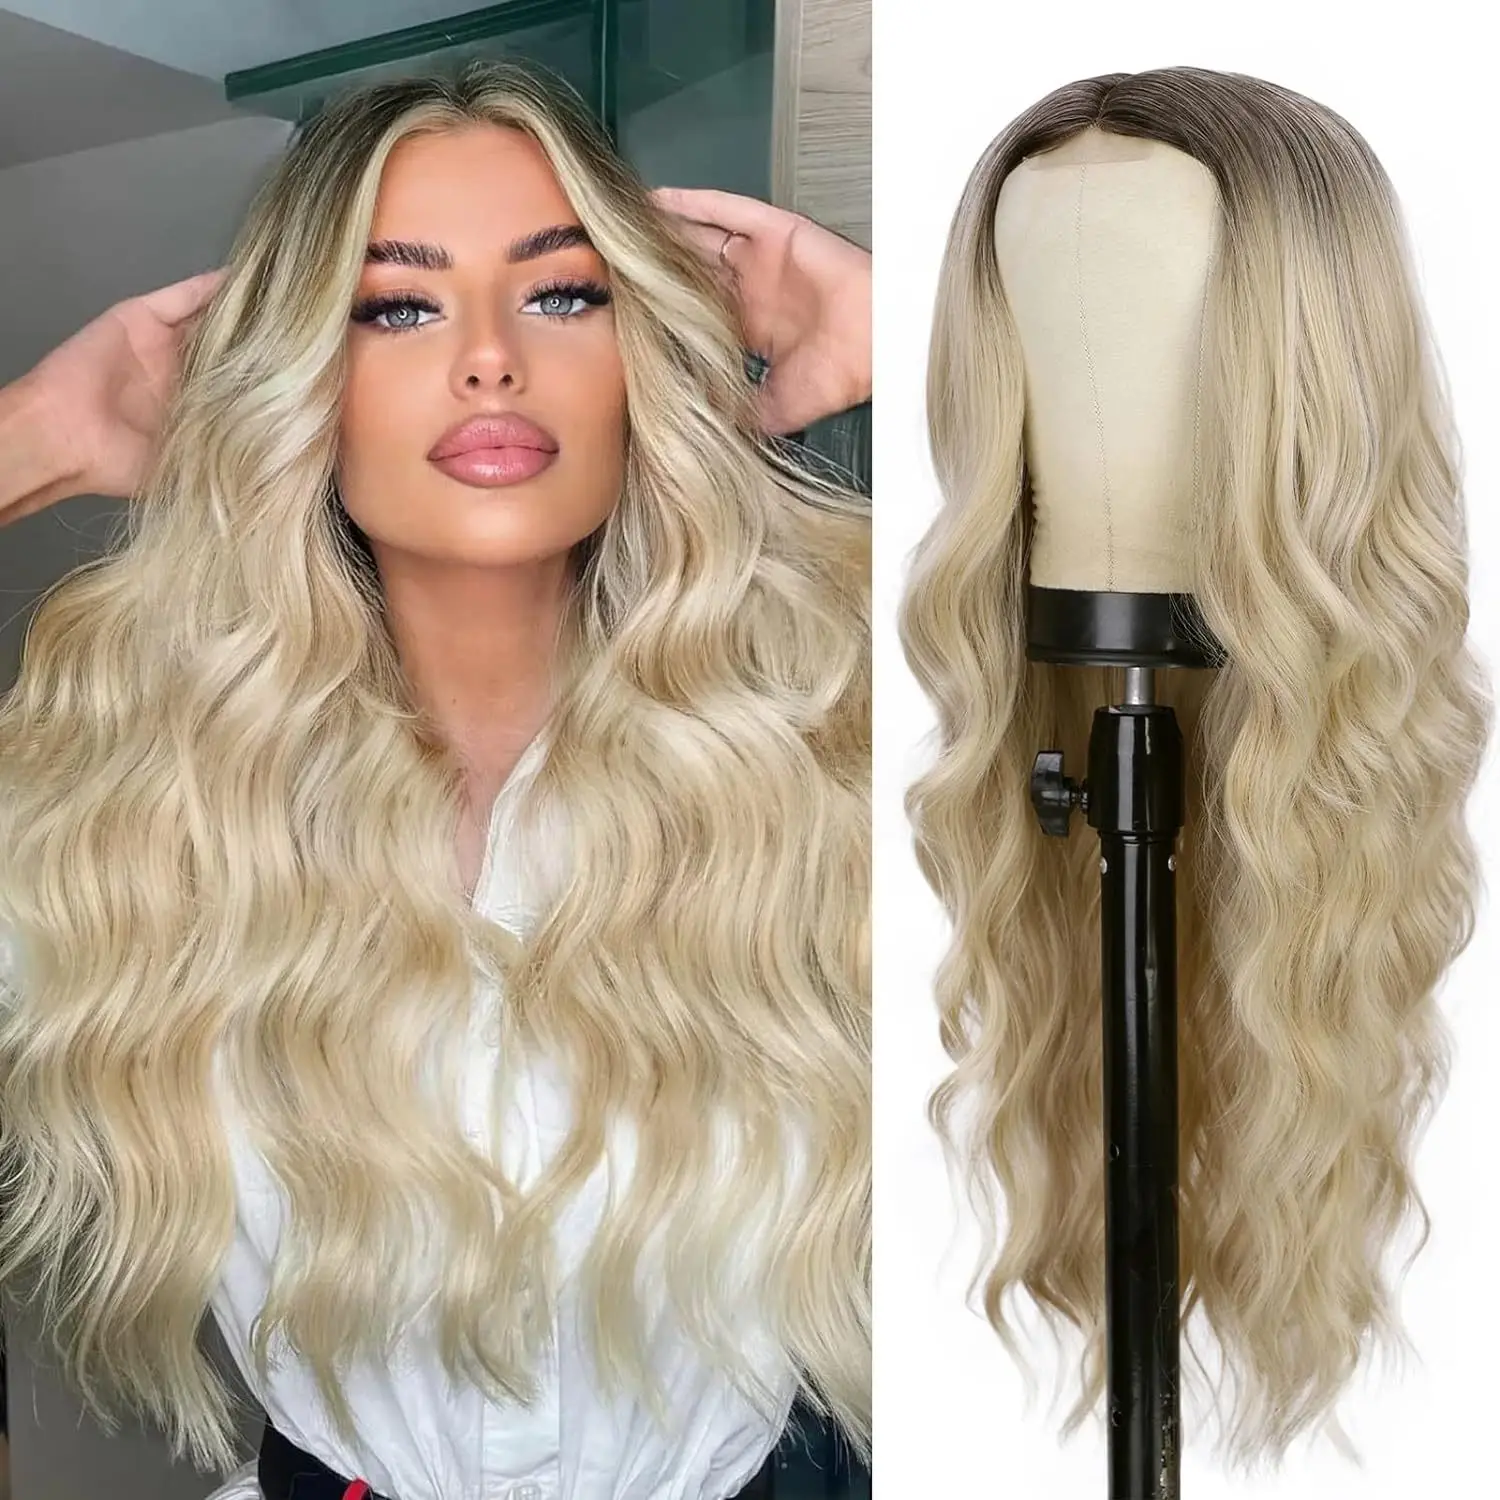 

Long Wavy Ombre Blonde Wig for Women, Synthetic Middle Part Wig, Natural Looking Wigs for Daily Use